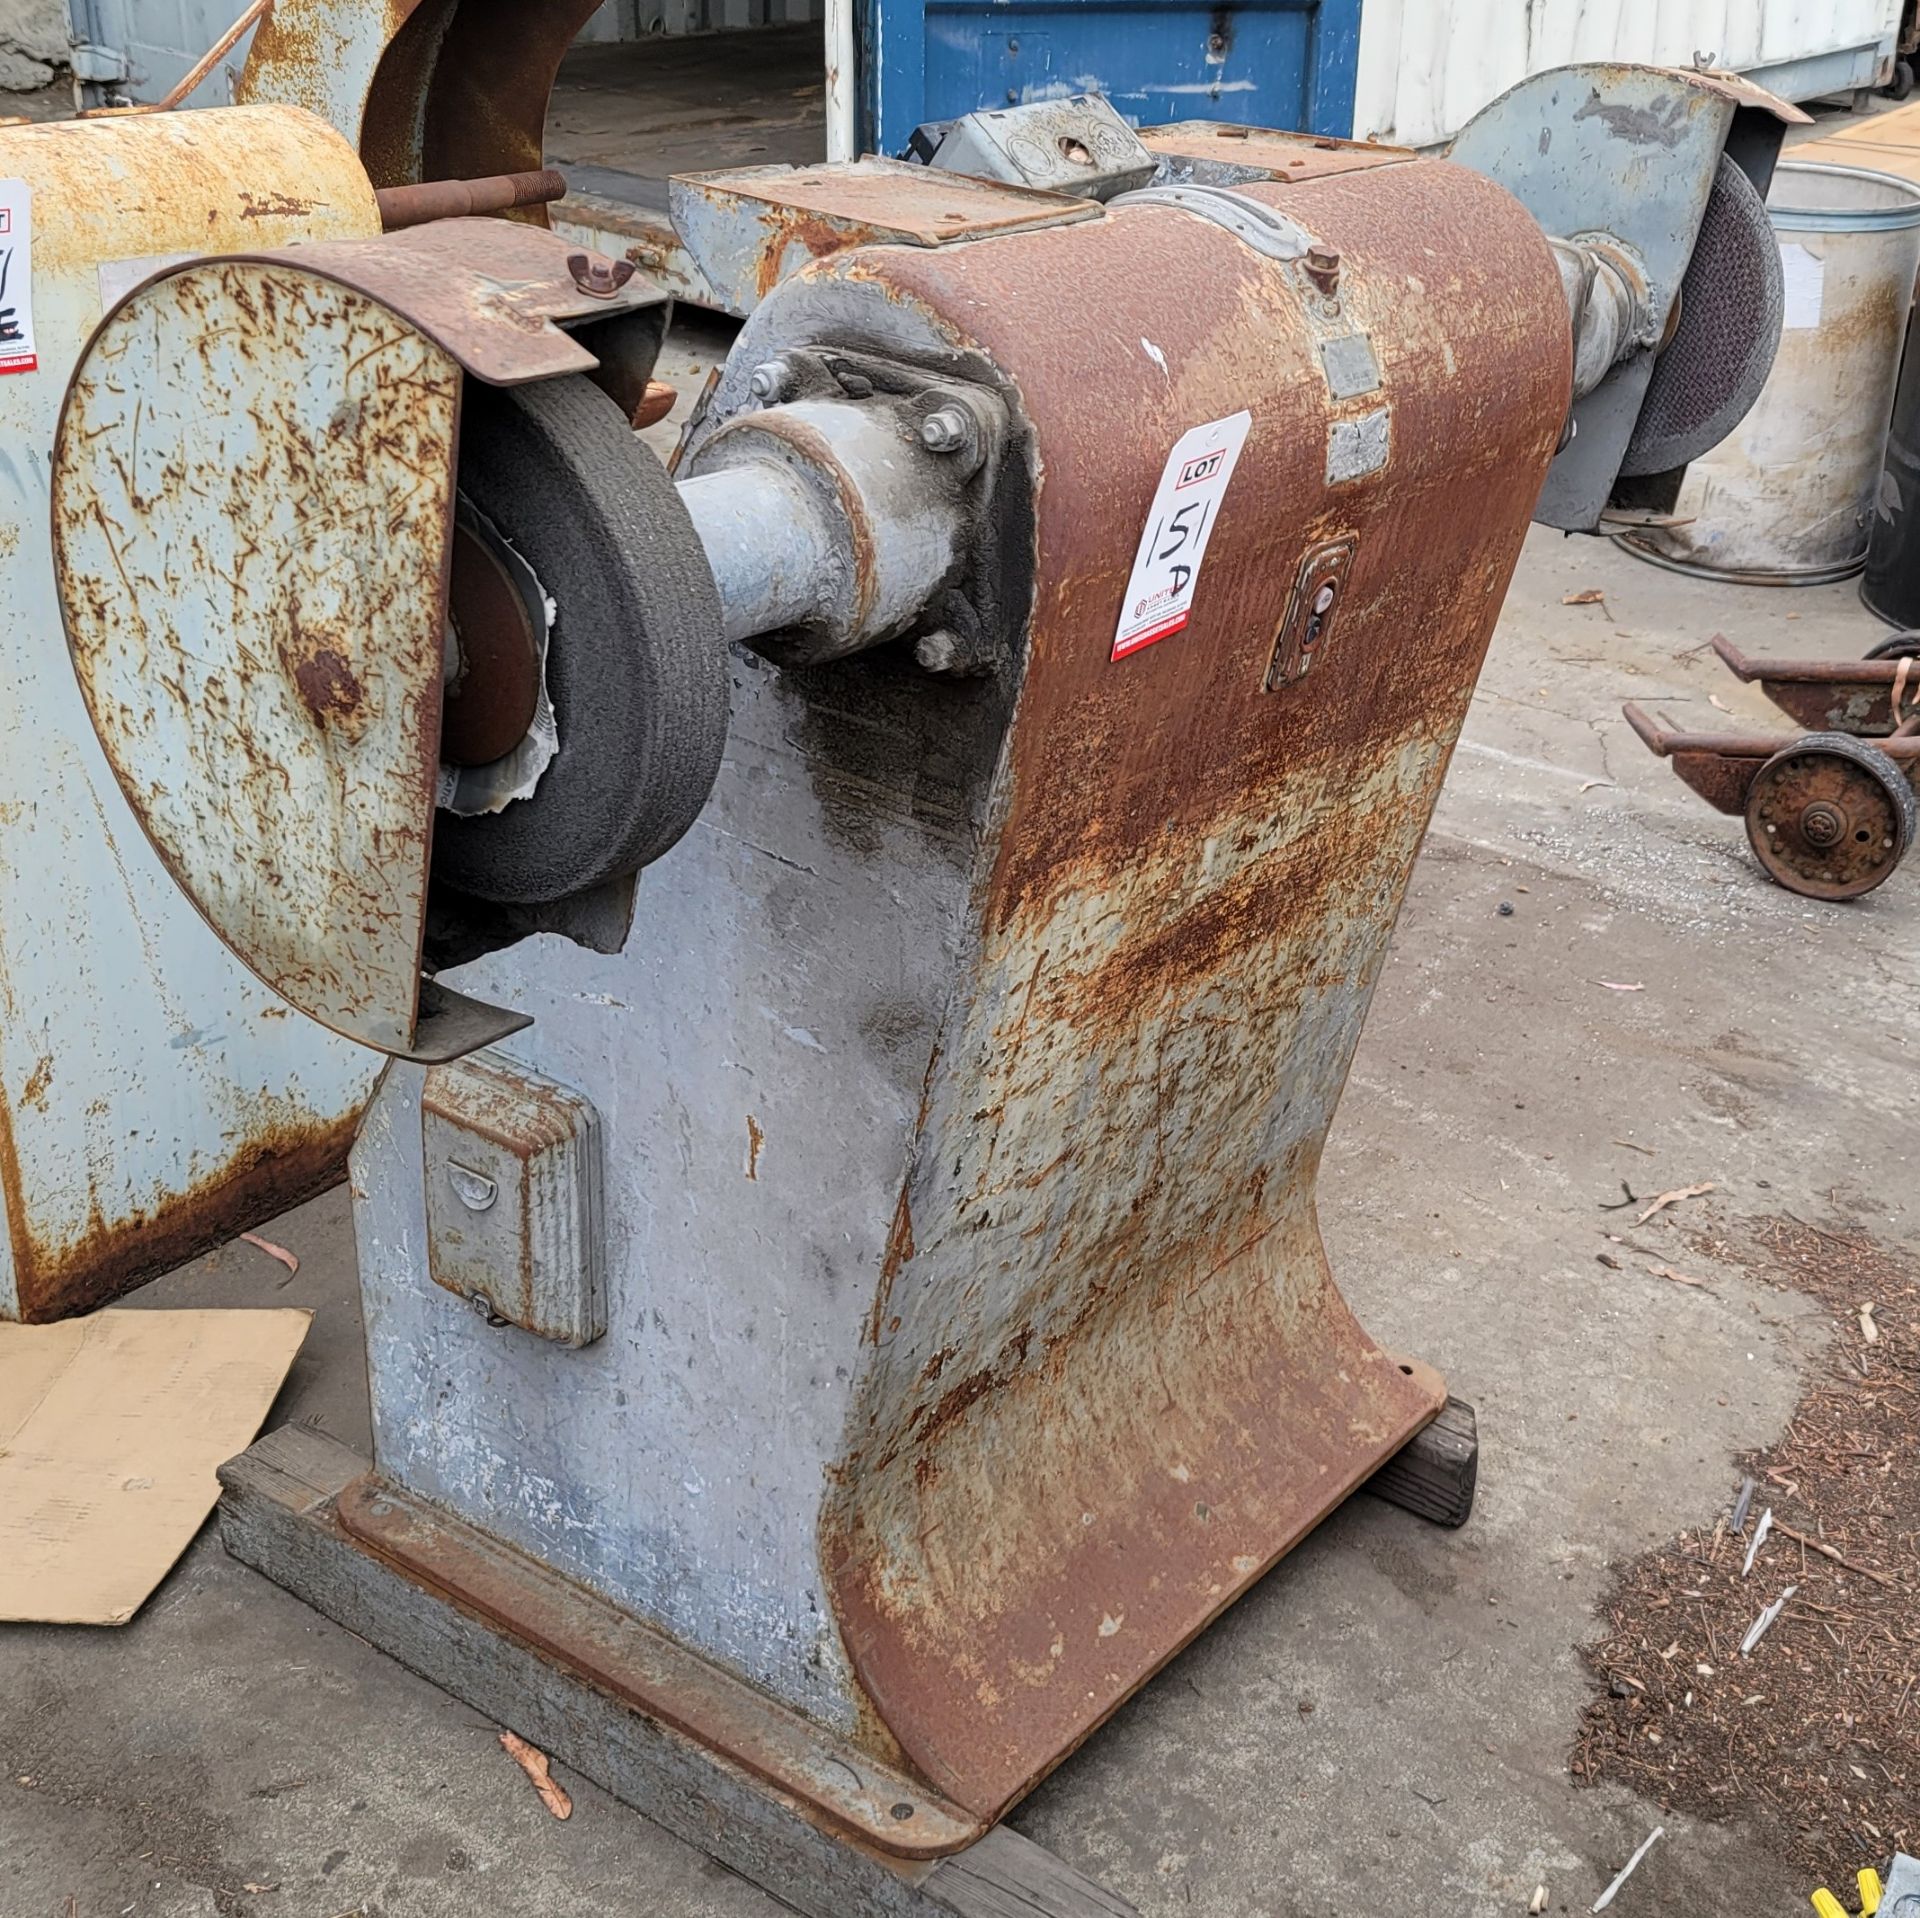 12" DOUBLE END FOUNDRY GRINDER